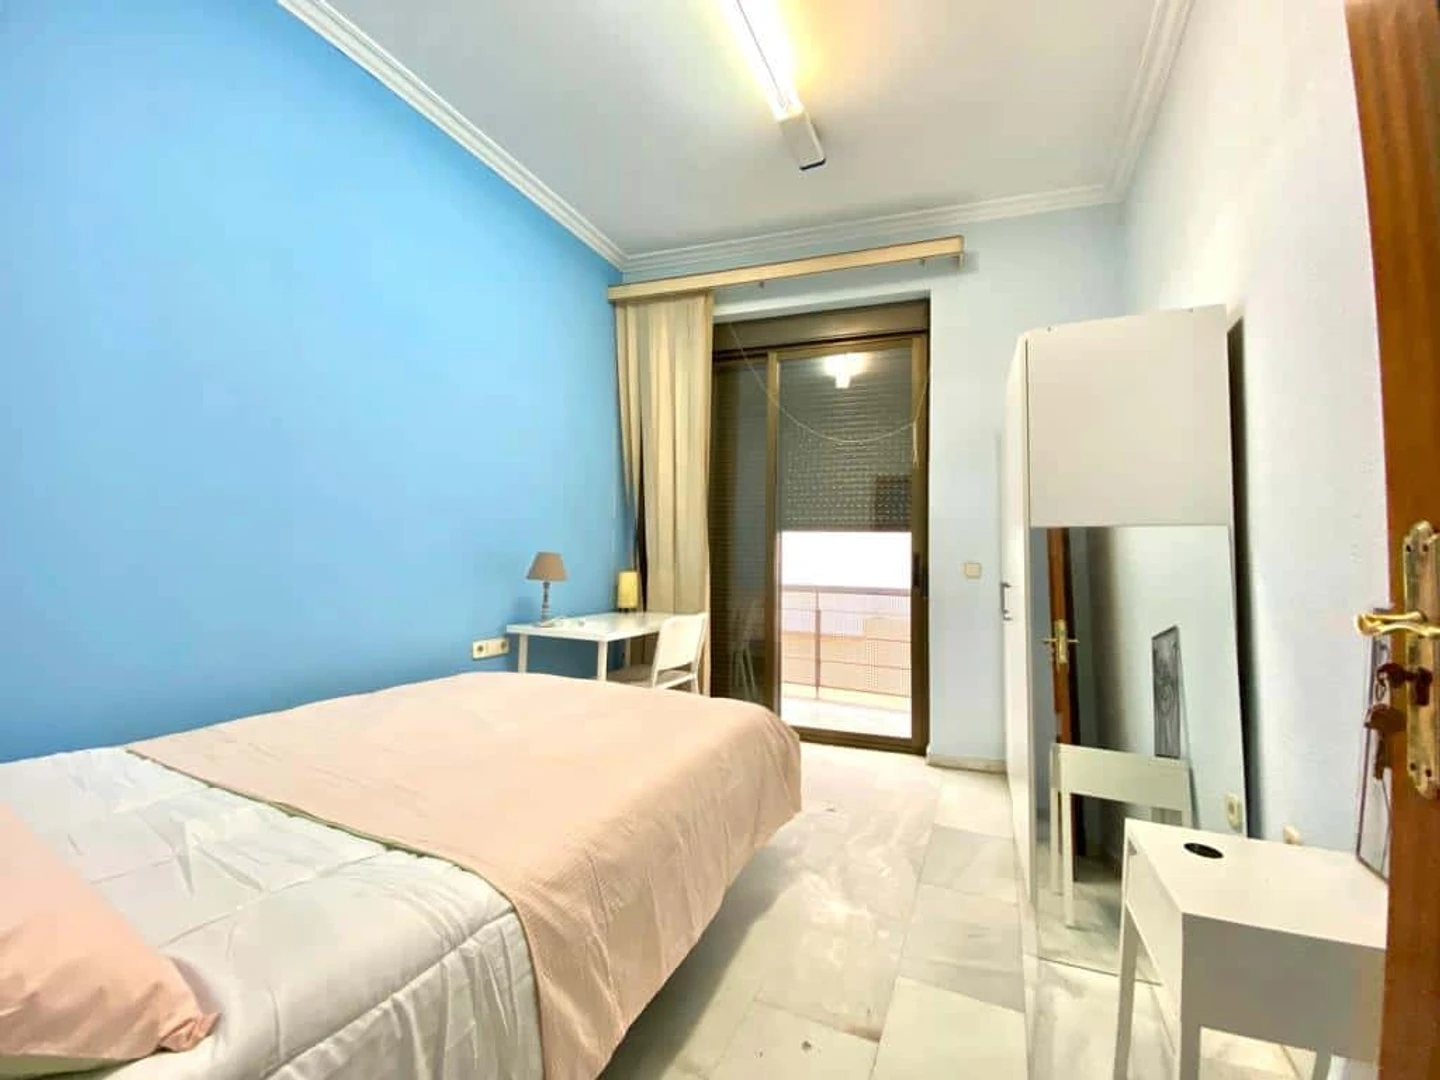 Cheap private room in Seville